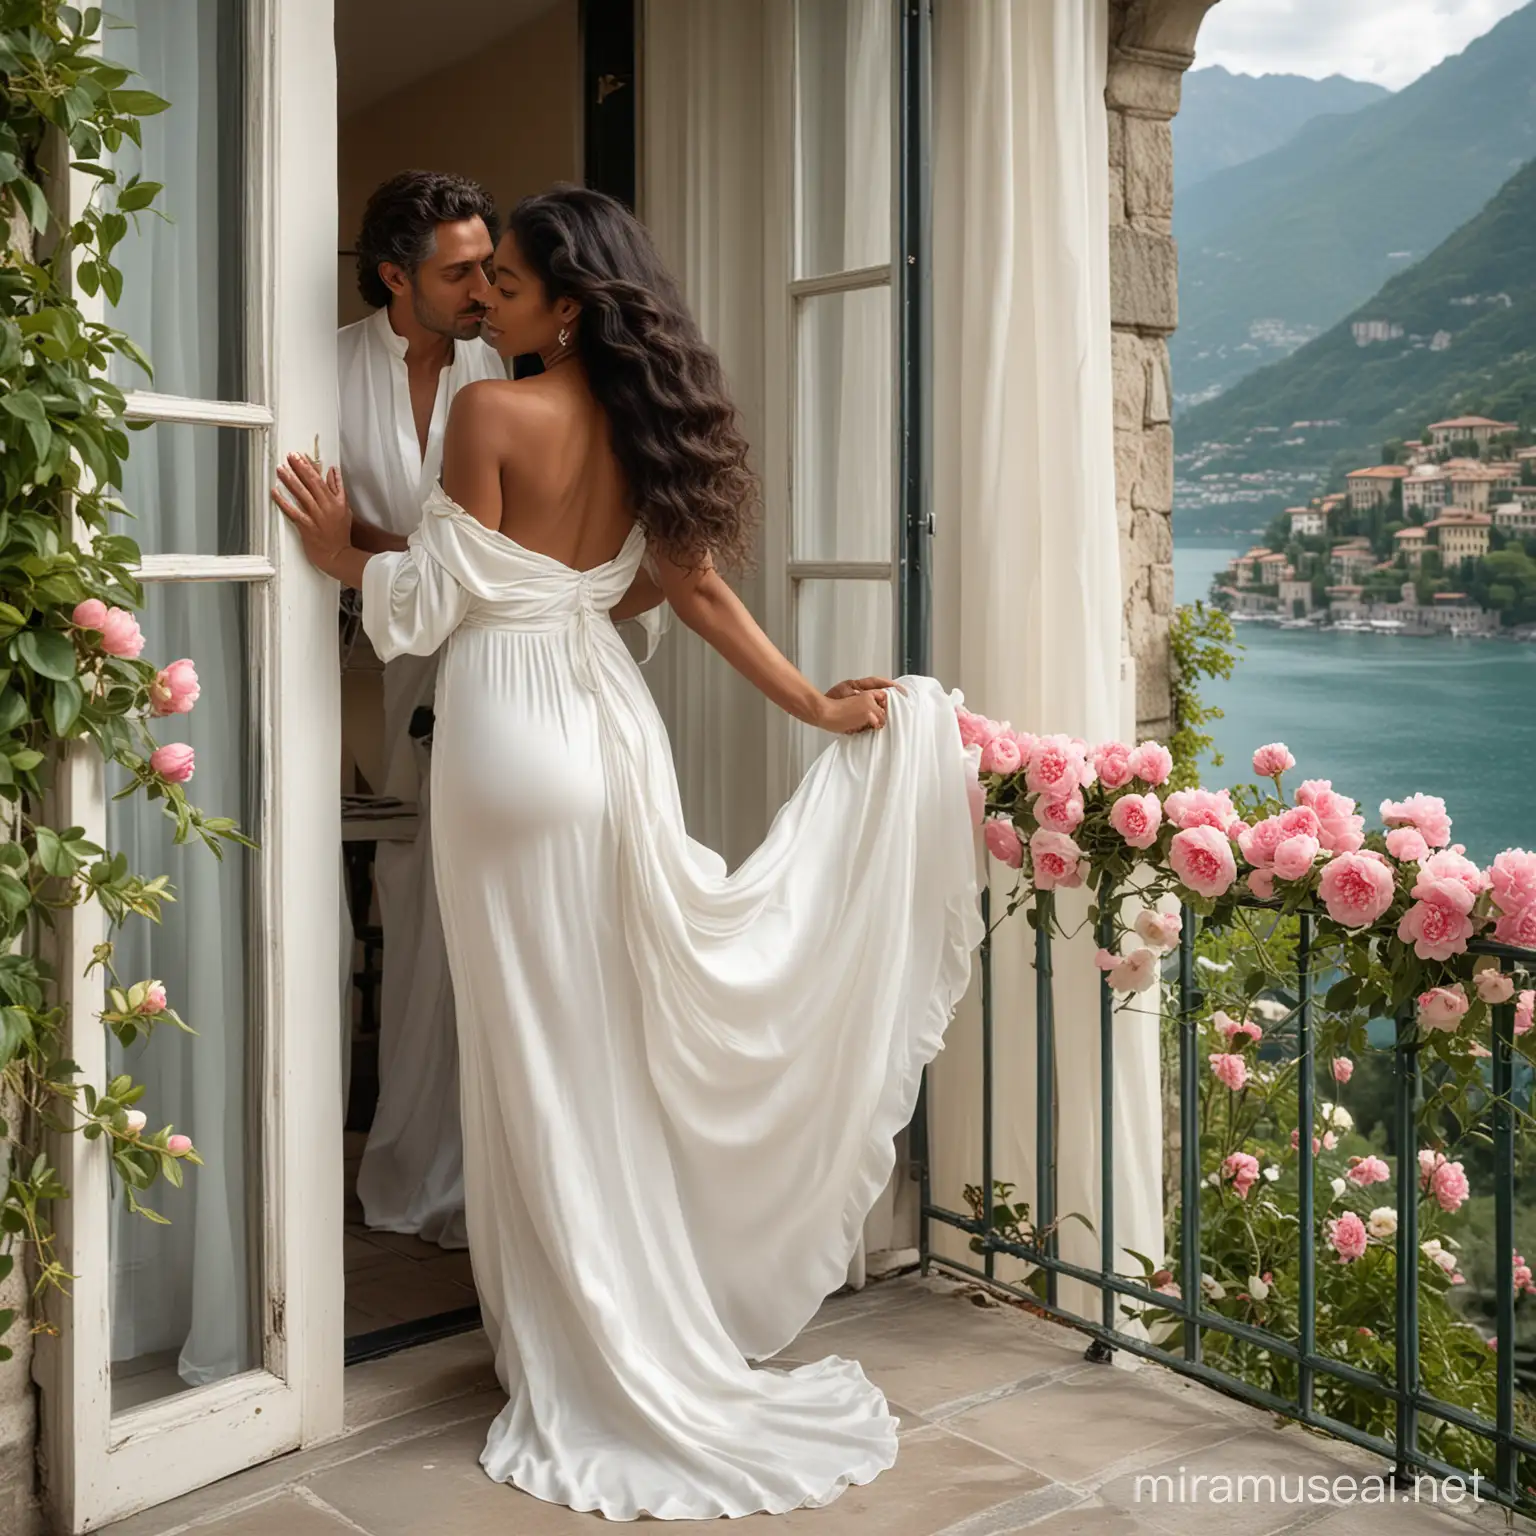 Beautiful Black lady with very long wavy hair in Italian villa wearing a white silk backless dress in a balcony doors overlooking the lake como holding peonies, with wind blown curtains with an Italian man ages 50 